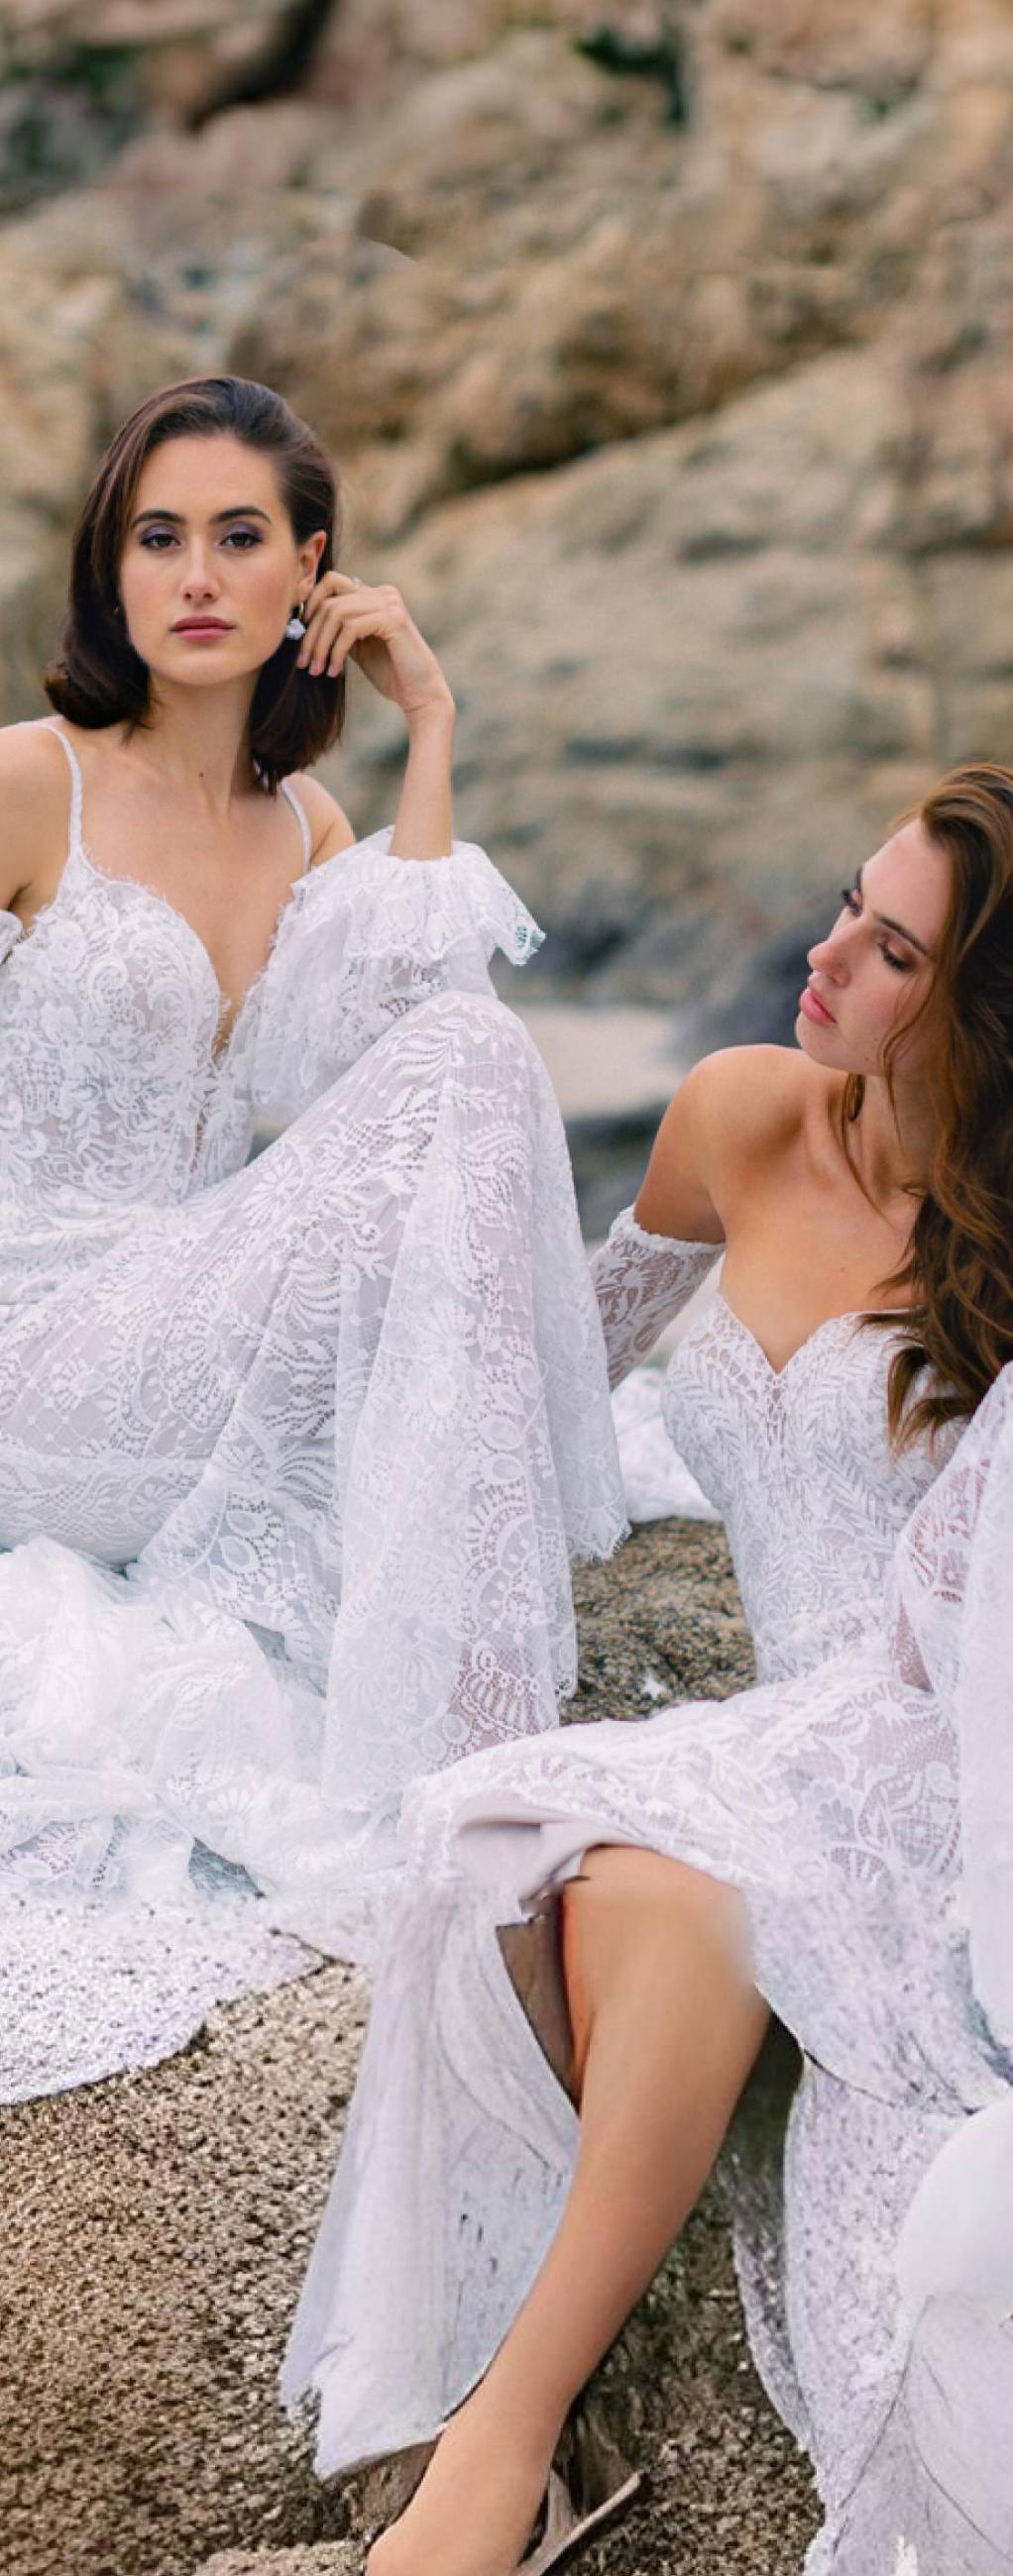 Photo of Models wearing bridal collection gowns